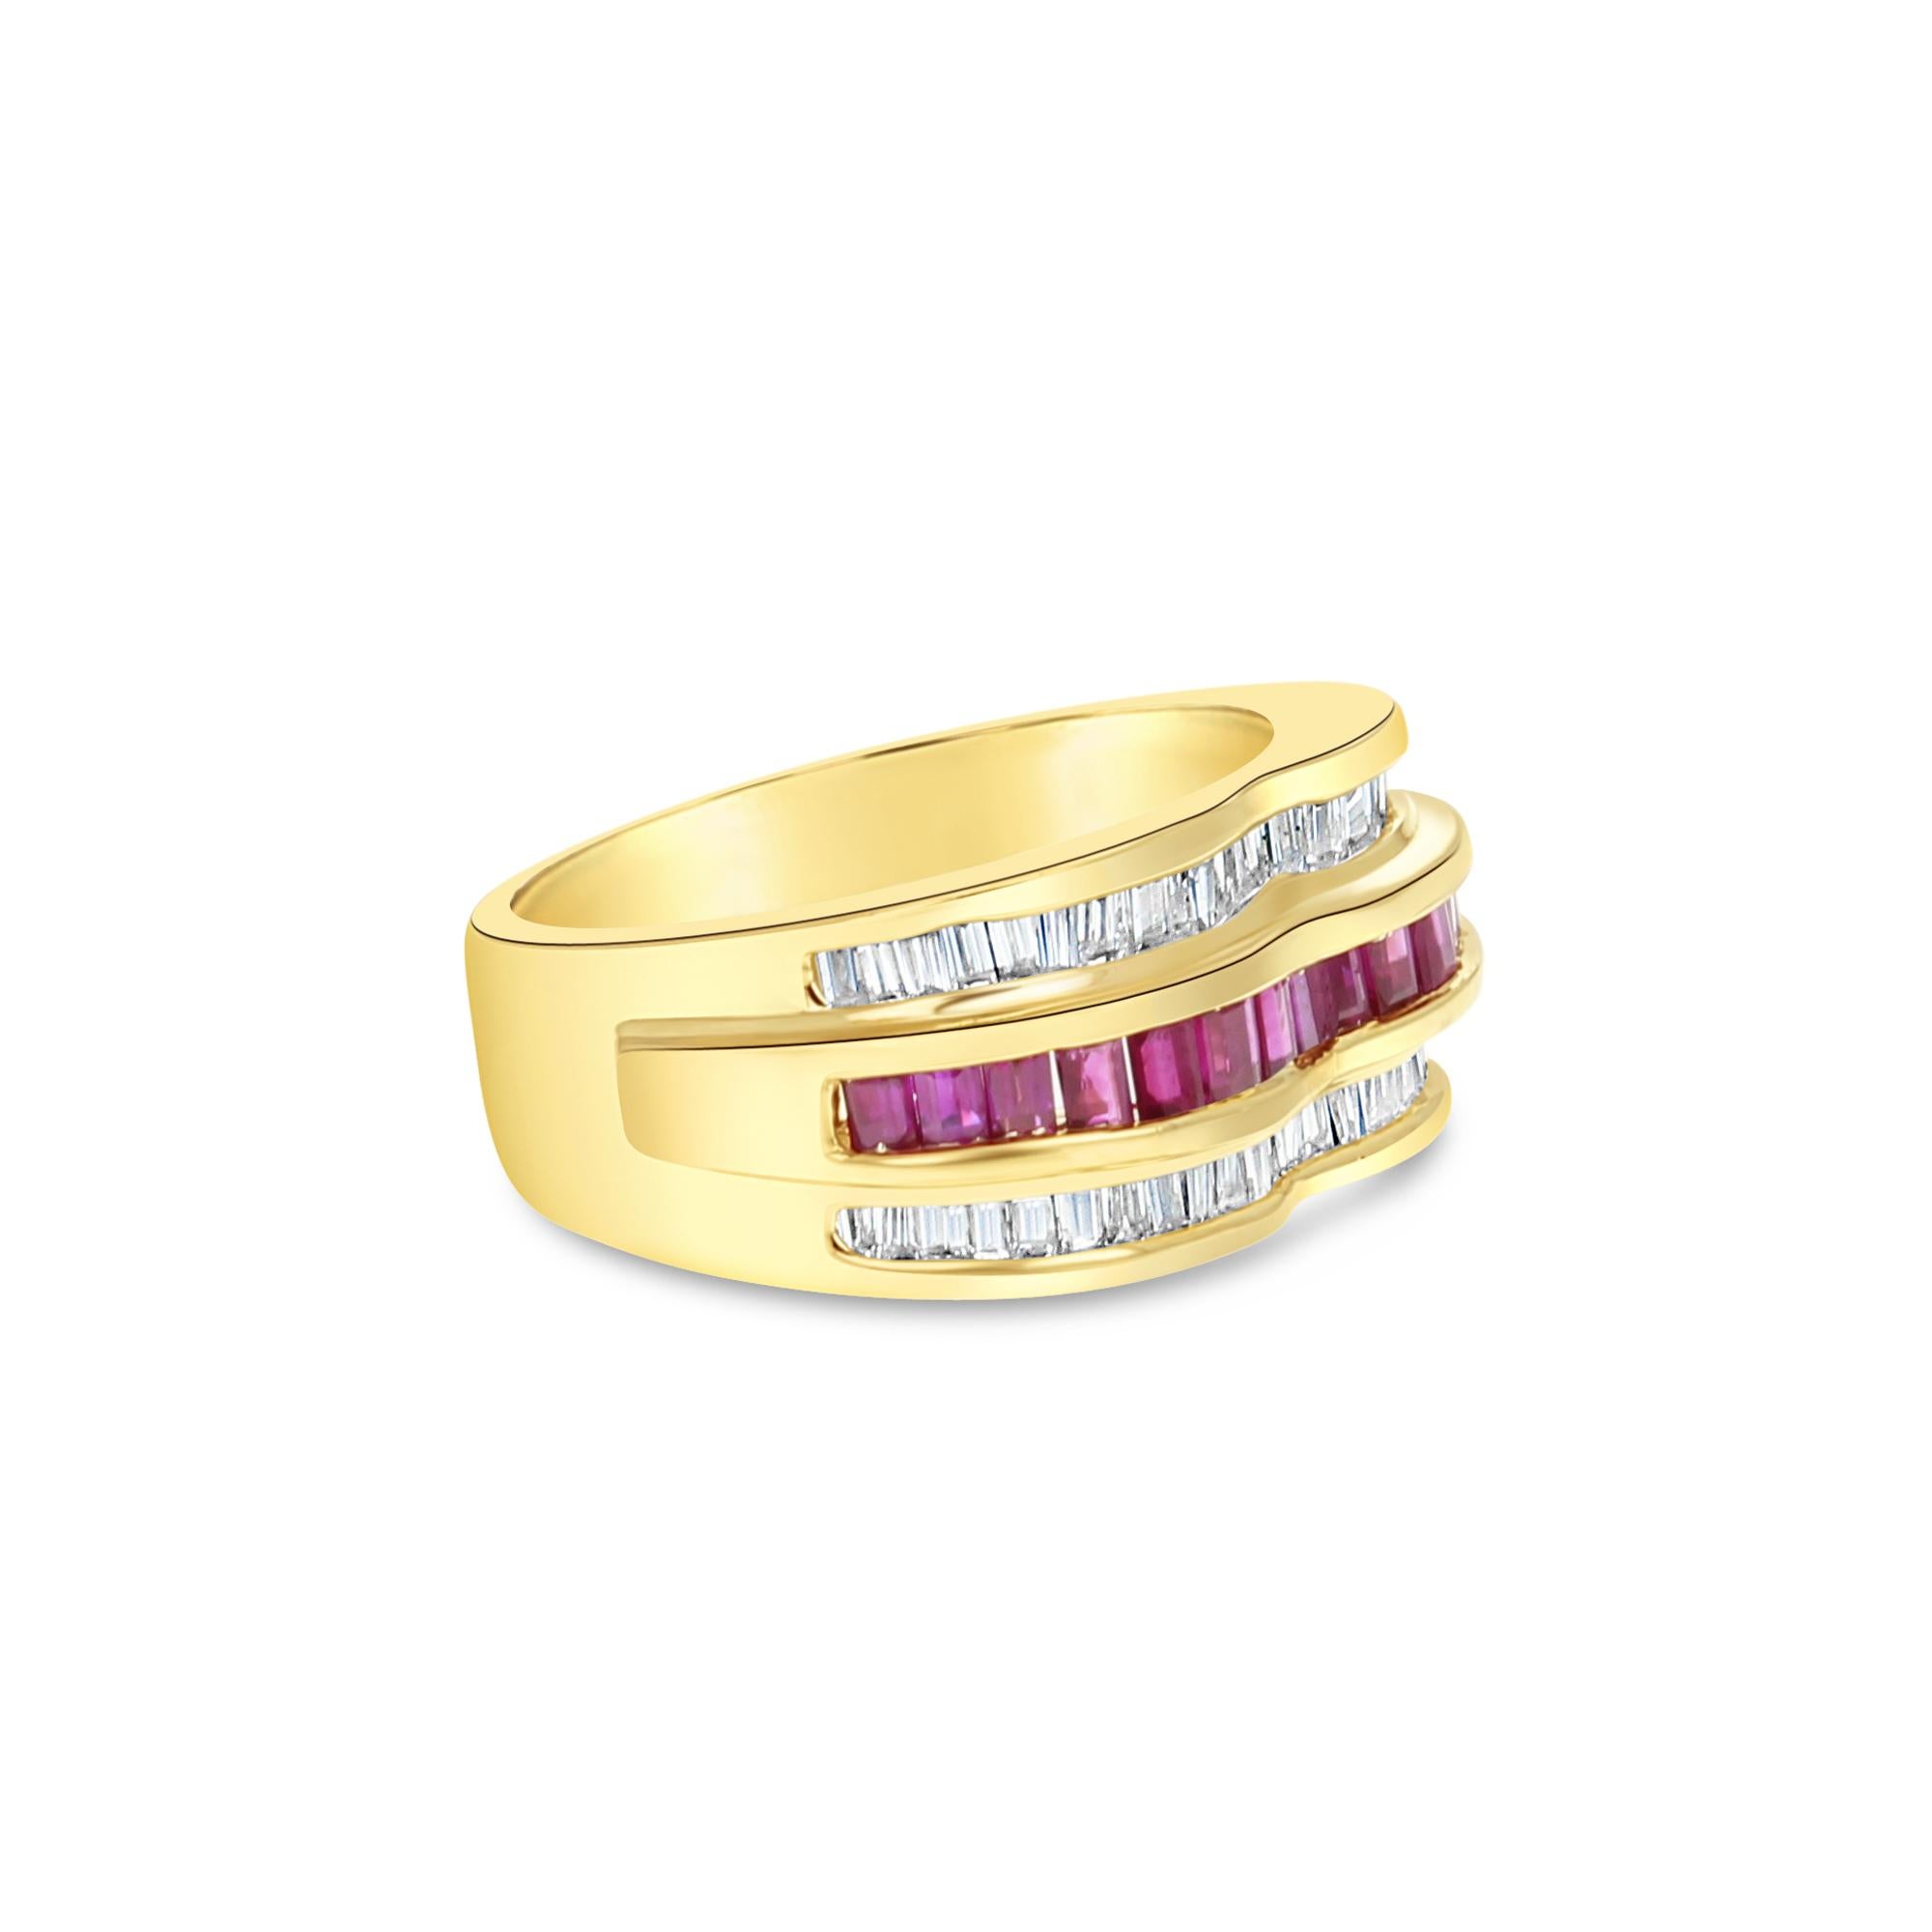 ♥ Product Summary ♥

Main Stone: Diamond & Ruby
Approx. Total Carat Weight: 2.00cttw
Diamond Cut: Baguette
Diamond Color: G/H
Diamond Clarity: VS2/SI1
Stone Cut: Baguette
Band Material: 14k Yellow Gold